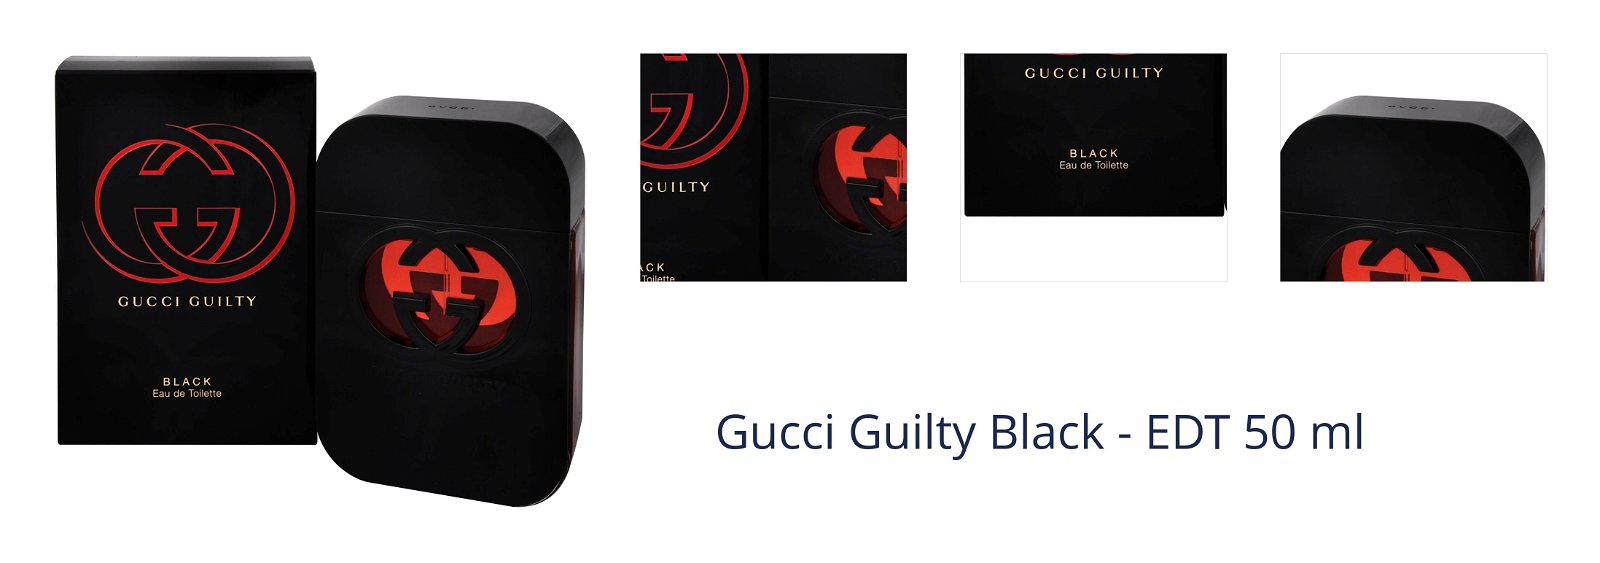 Gucci Guilty Black - EDT 50 ml 1